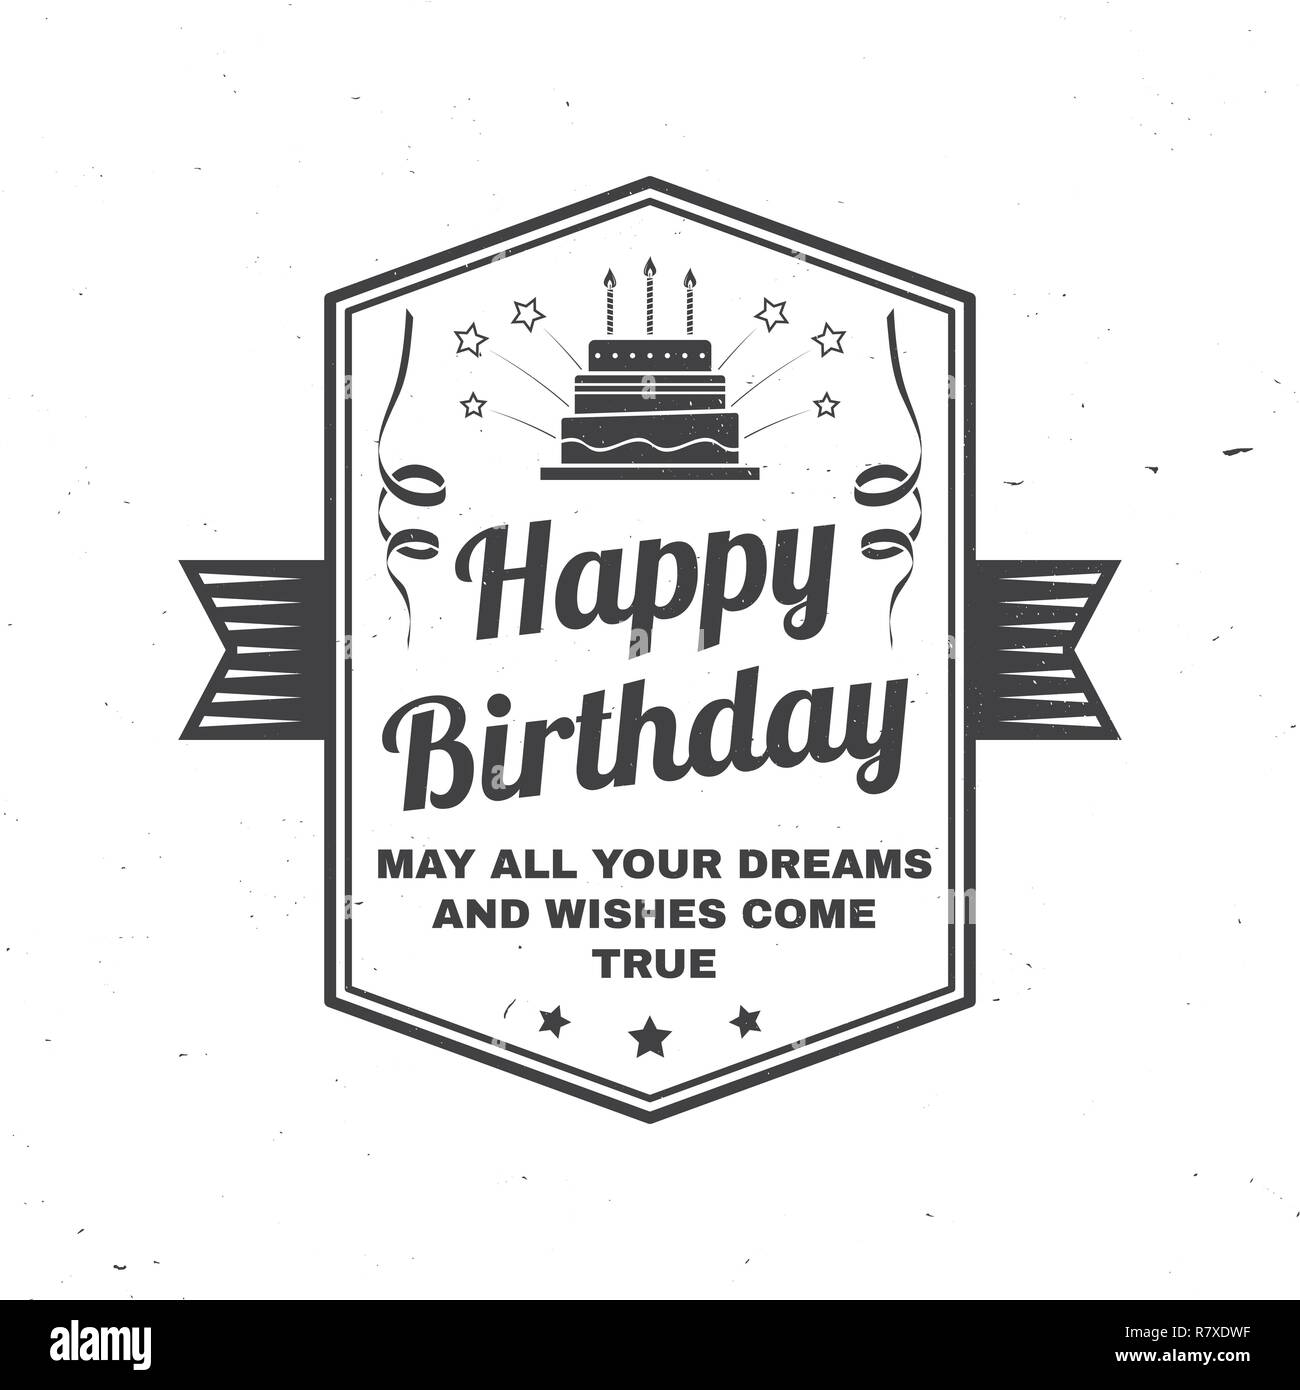 Happy Birthday to you. May all your dreams and wishes come true. Stamp, badge, card with birthday cake with candles and serpentine. Vector. Design for birthday celebration emblem in retro style Stock Vector